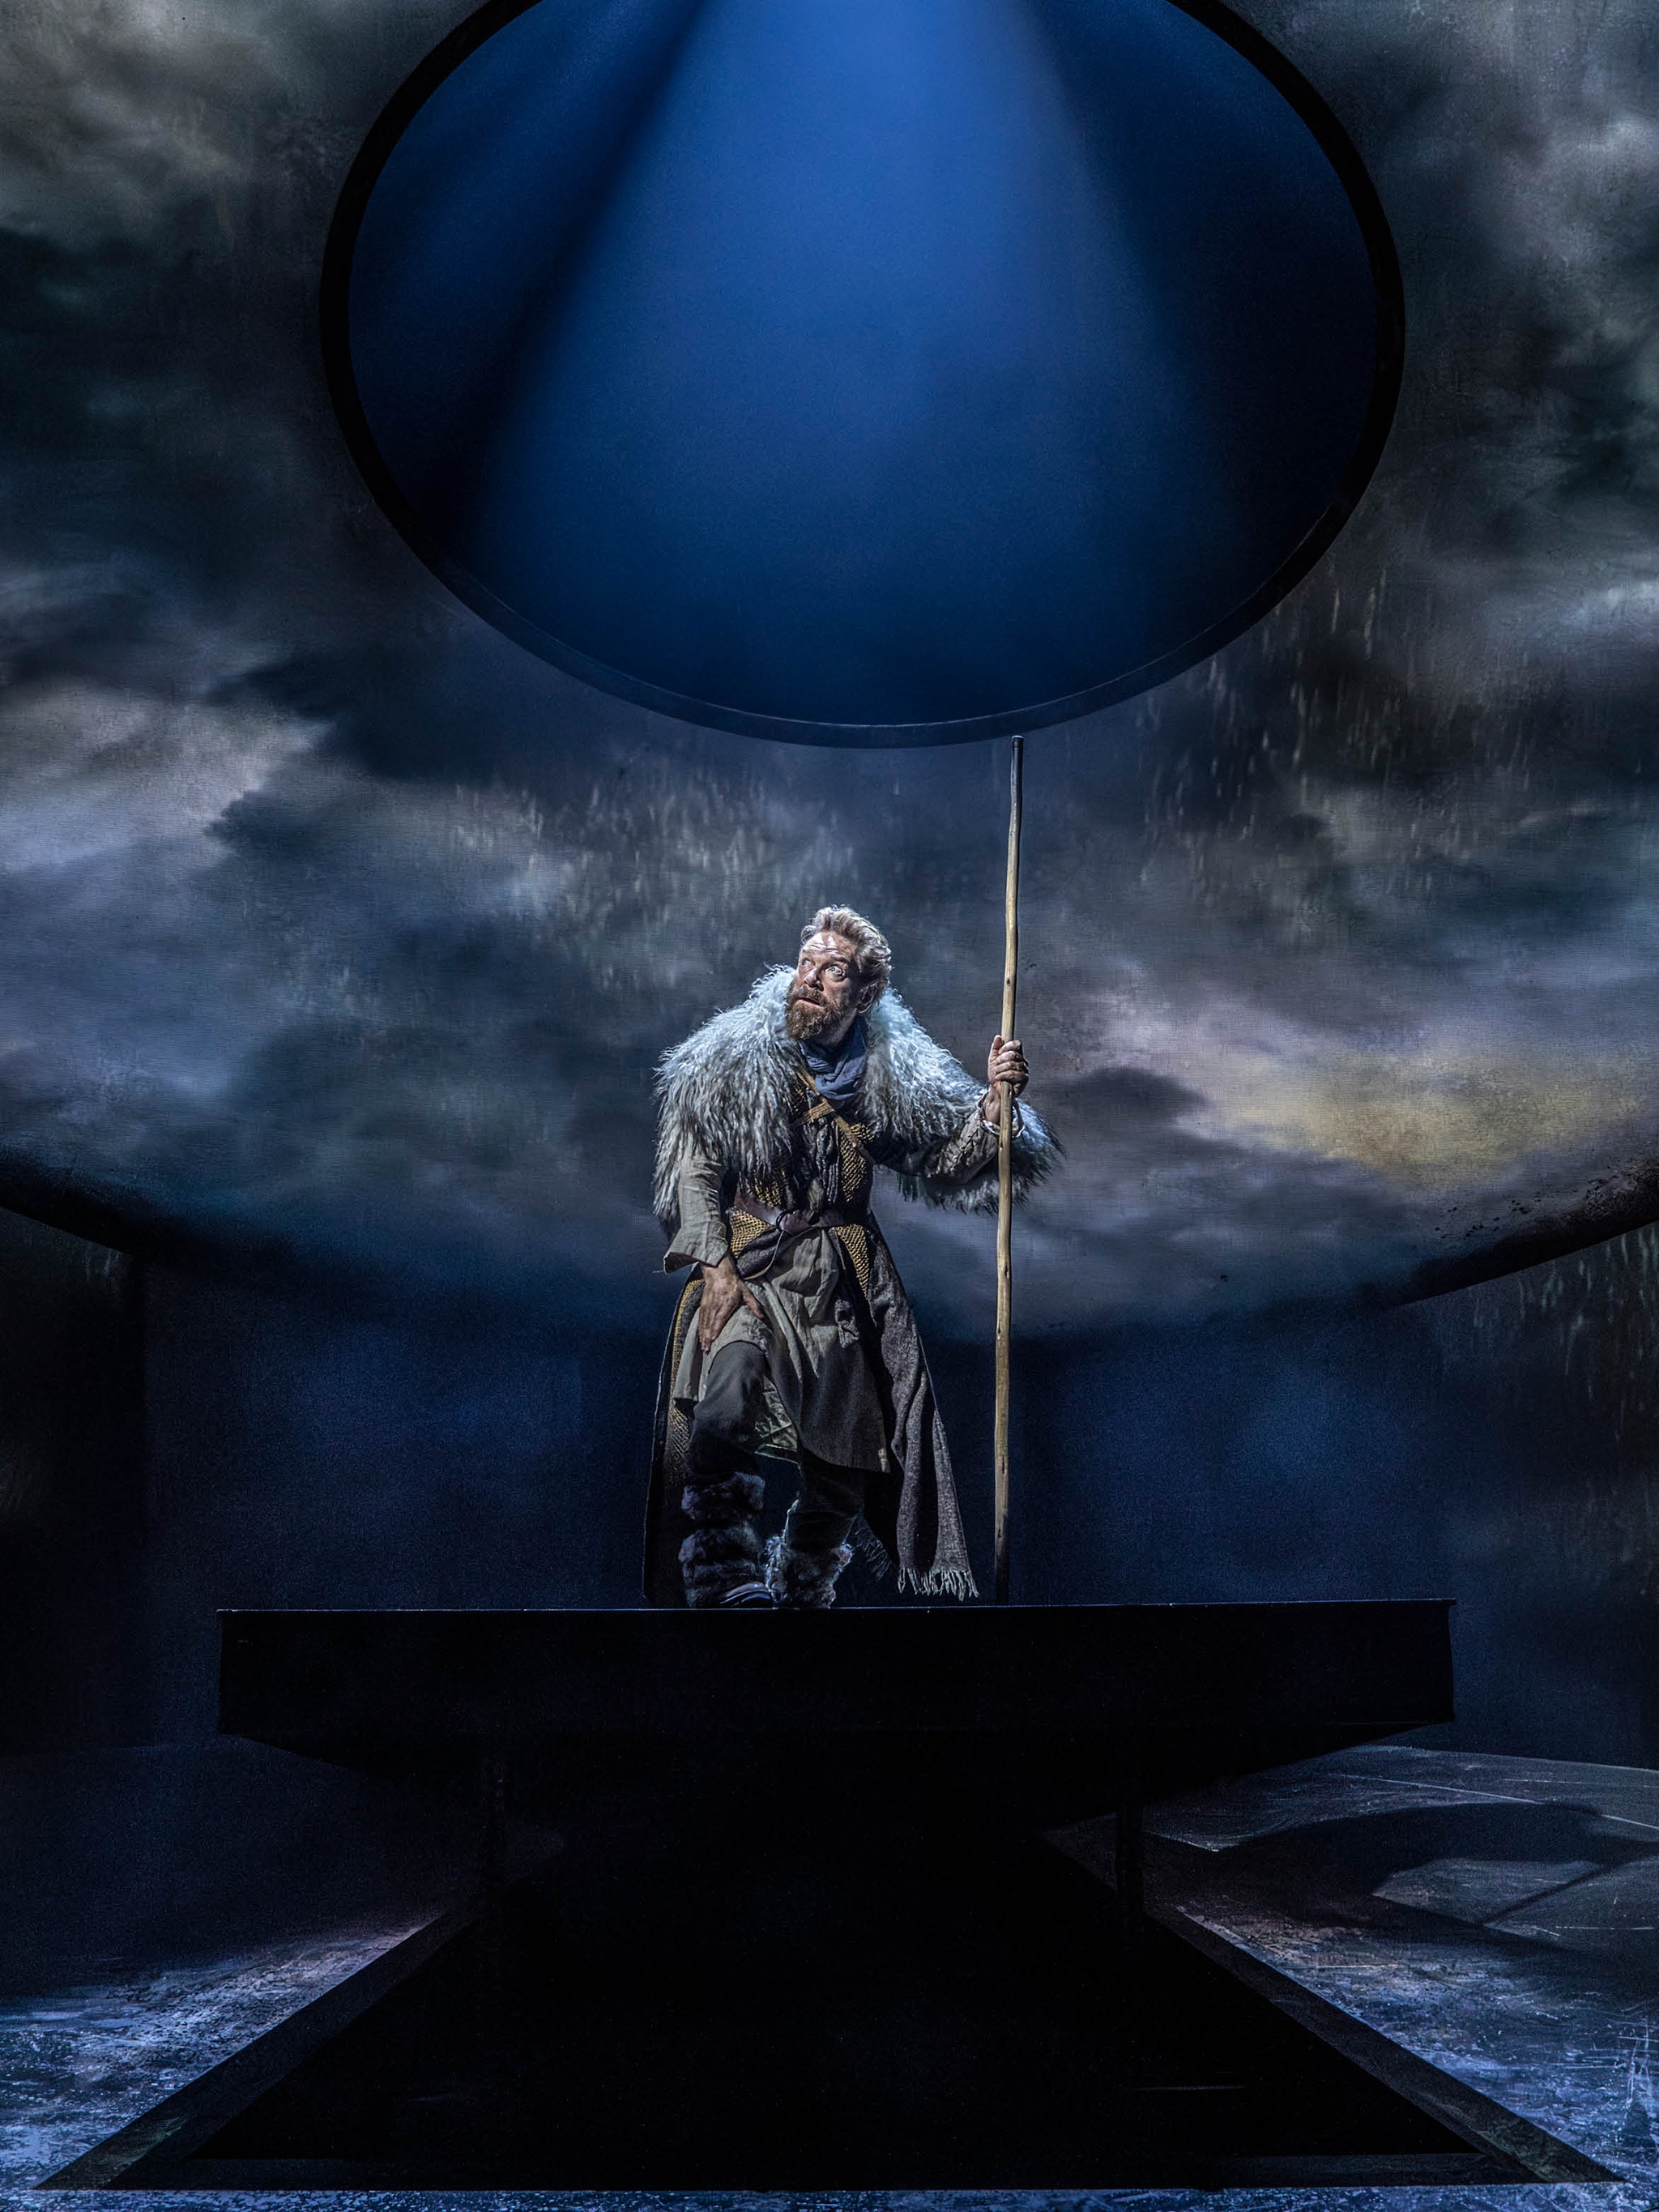 Actor Kenneth Branagh stands on a stage, atop a circular platform. We see him from an angle slightly below, looking up at him. He is dressed as King Lear with an animal pelt draped over his shoulders and holding a tall staff. Above him, a circular screen above the stage displays moody storm clouds. He turns his attention to the clouds with a look of wide-eyed trepidation on his face.  